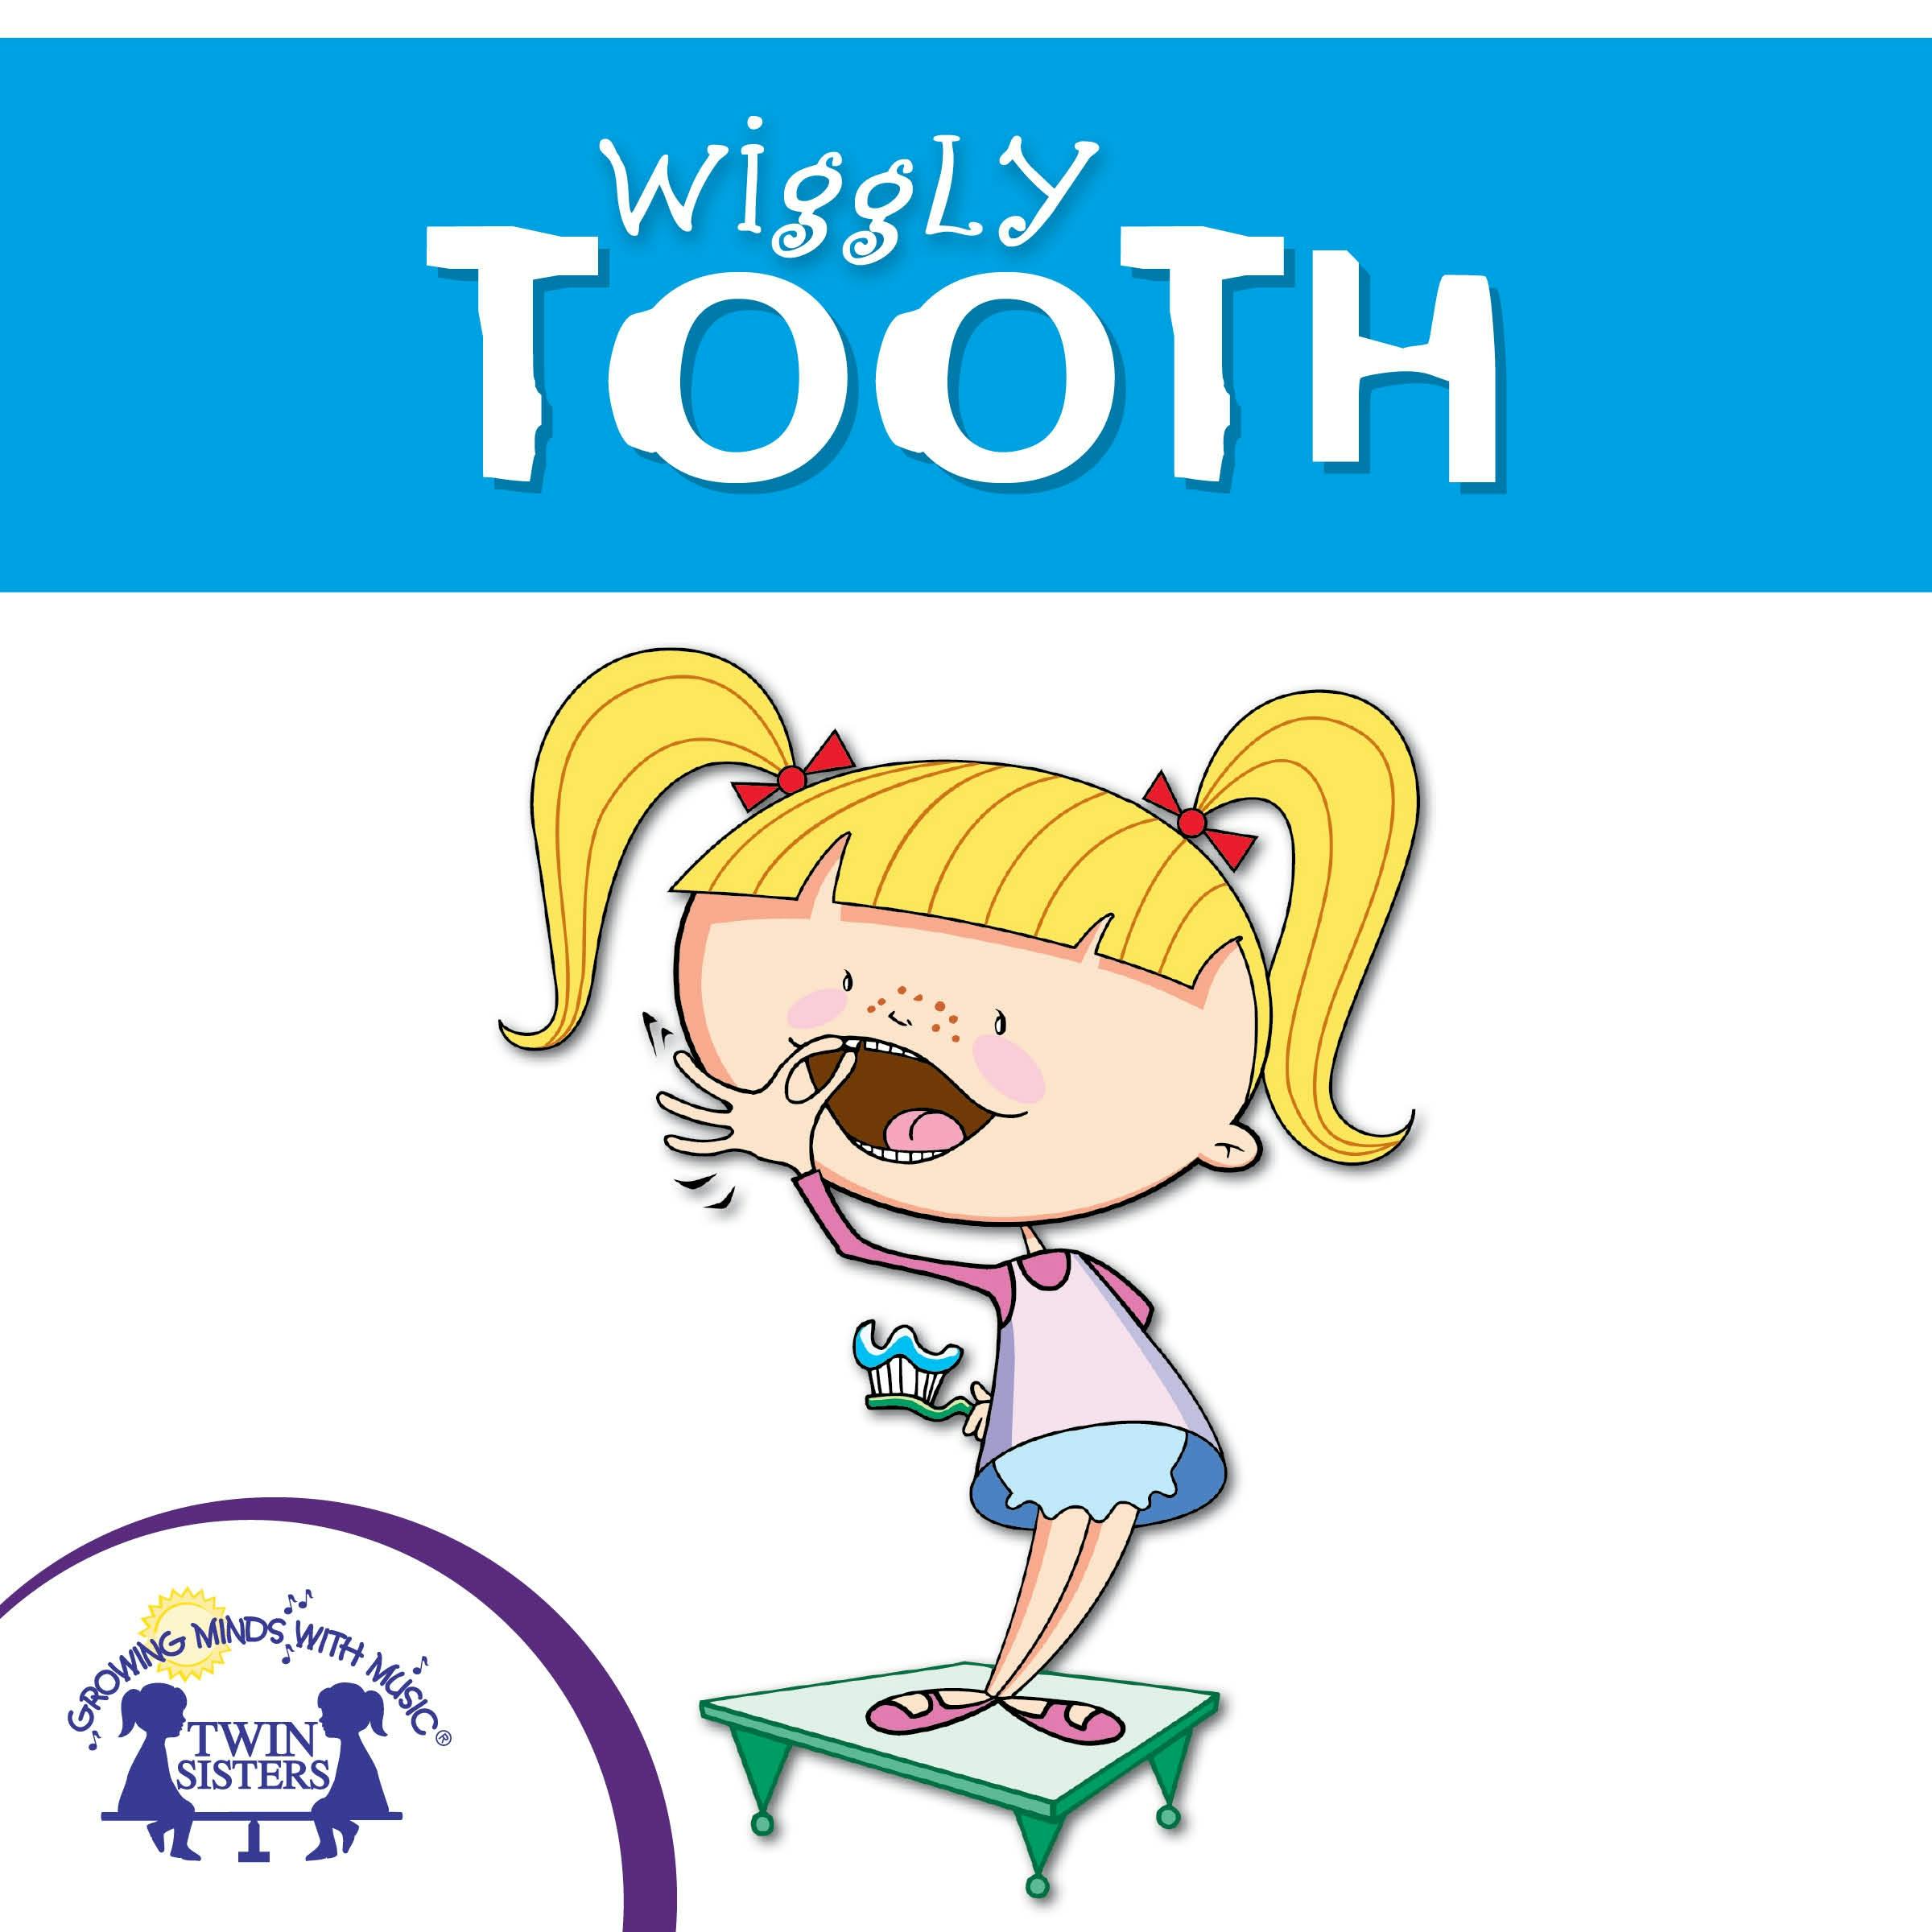 Wiggly Tooth - undefined